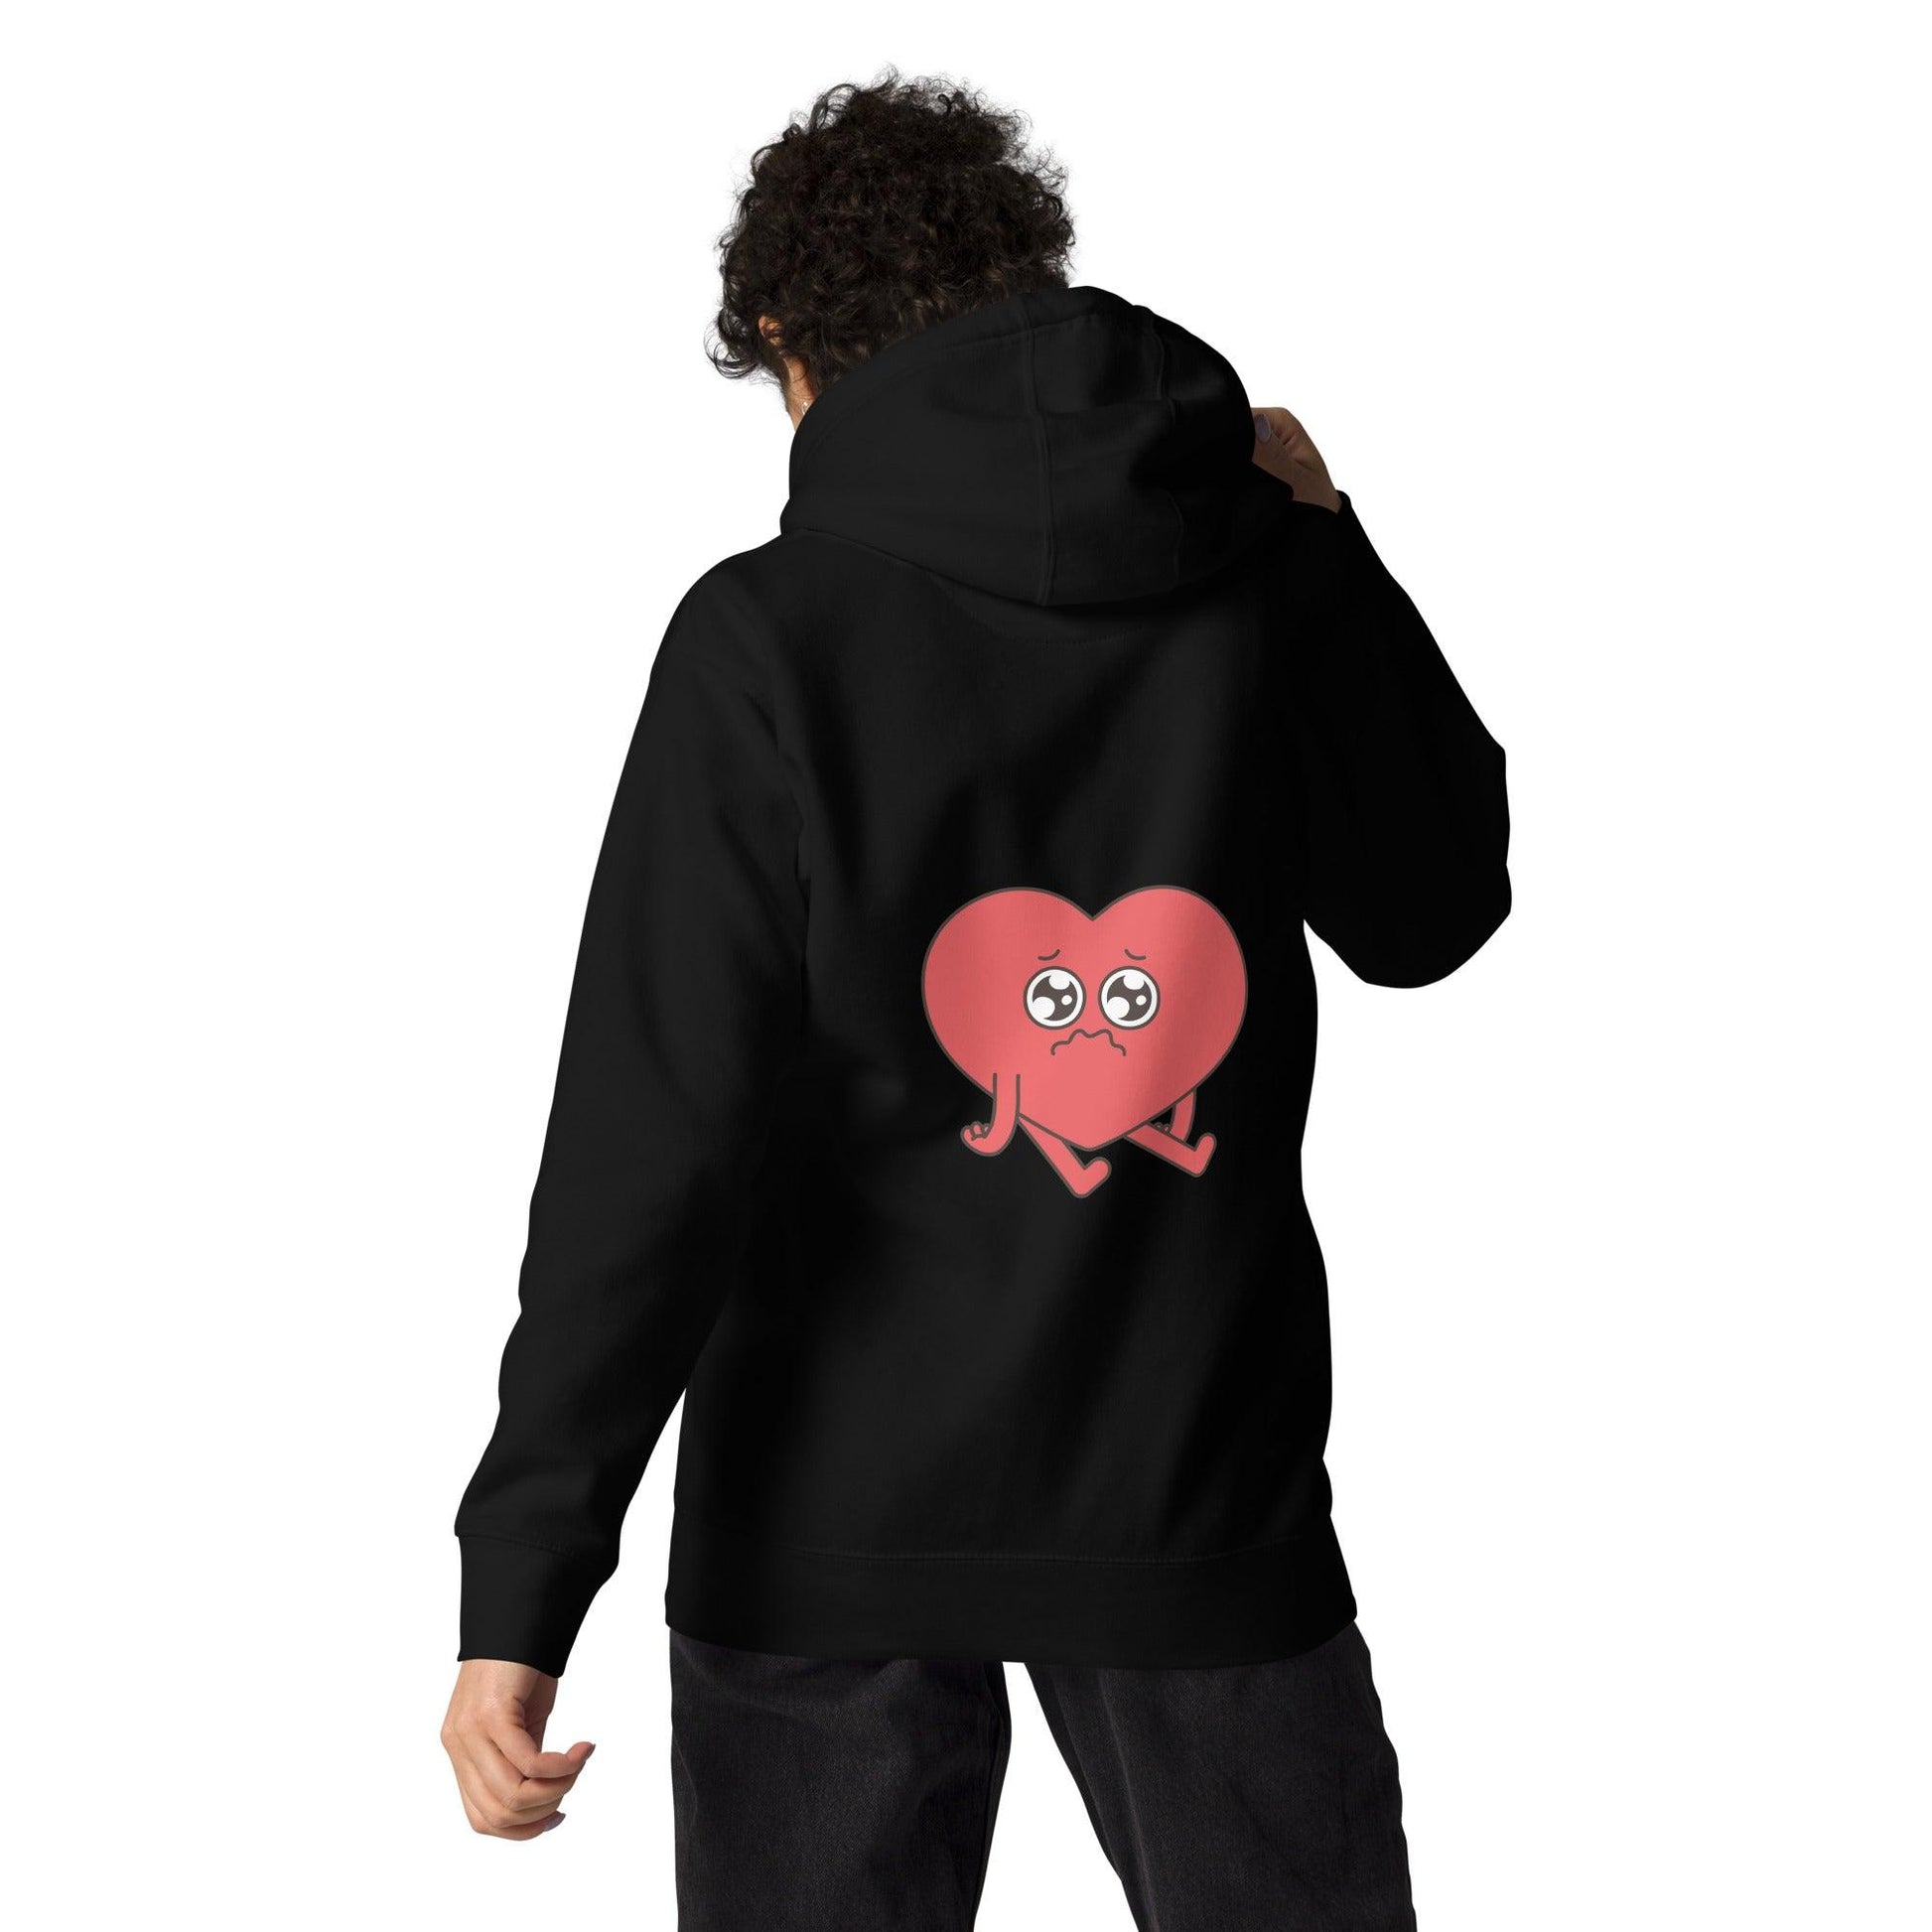 Craig's Crafting Co | Cry It Out Unisex Hoodie - Craig’s Crafting Co.